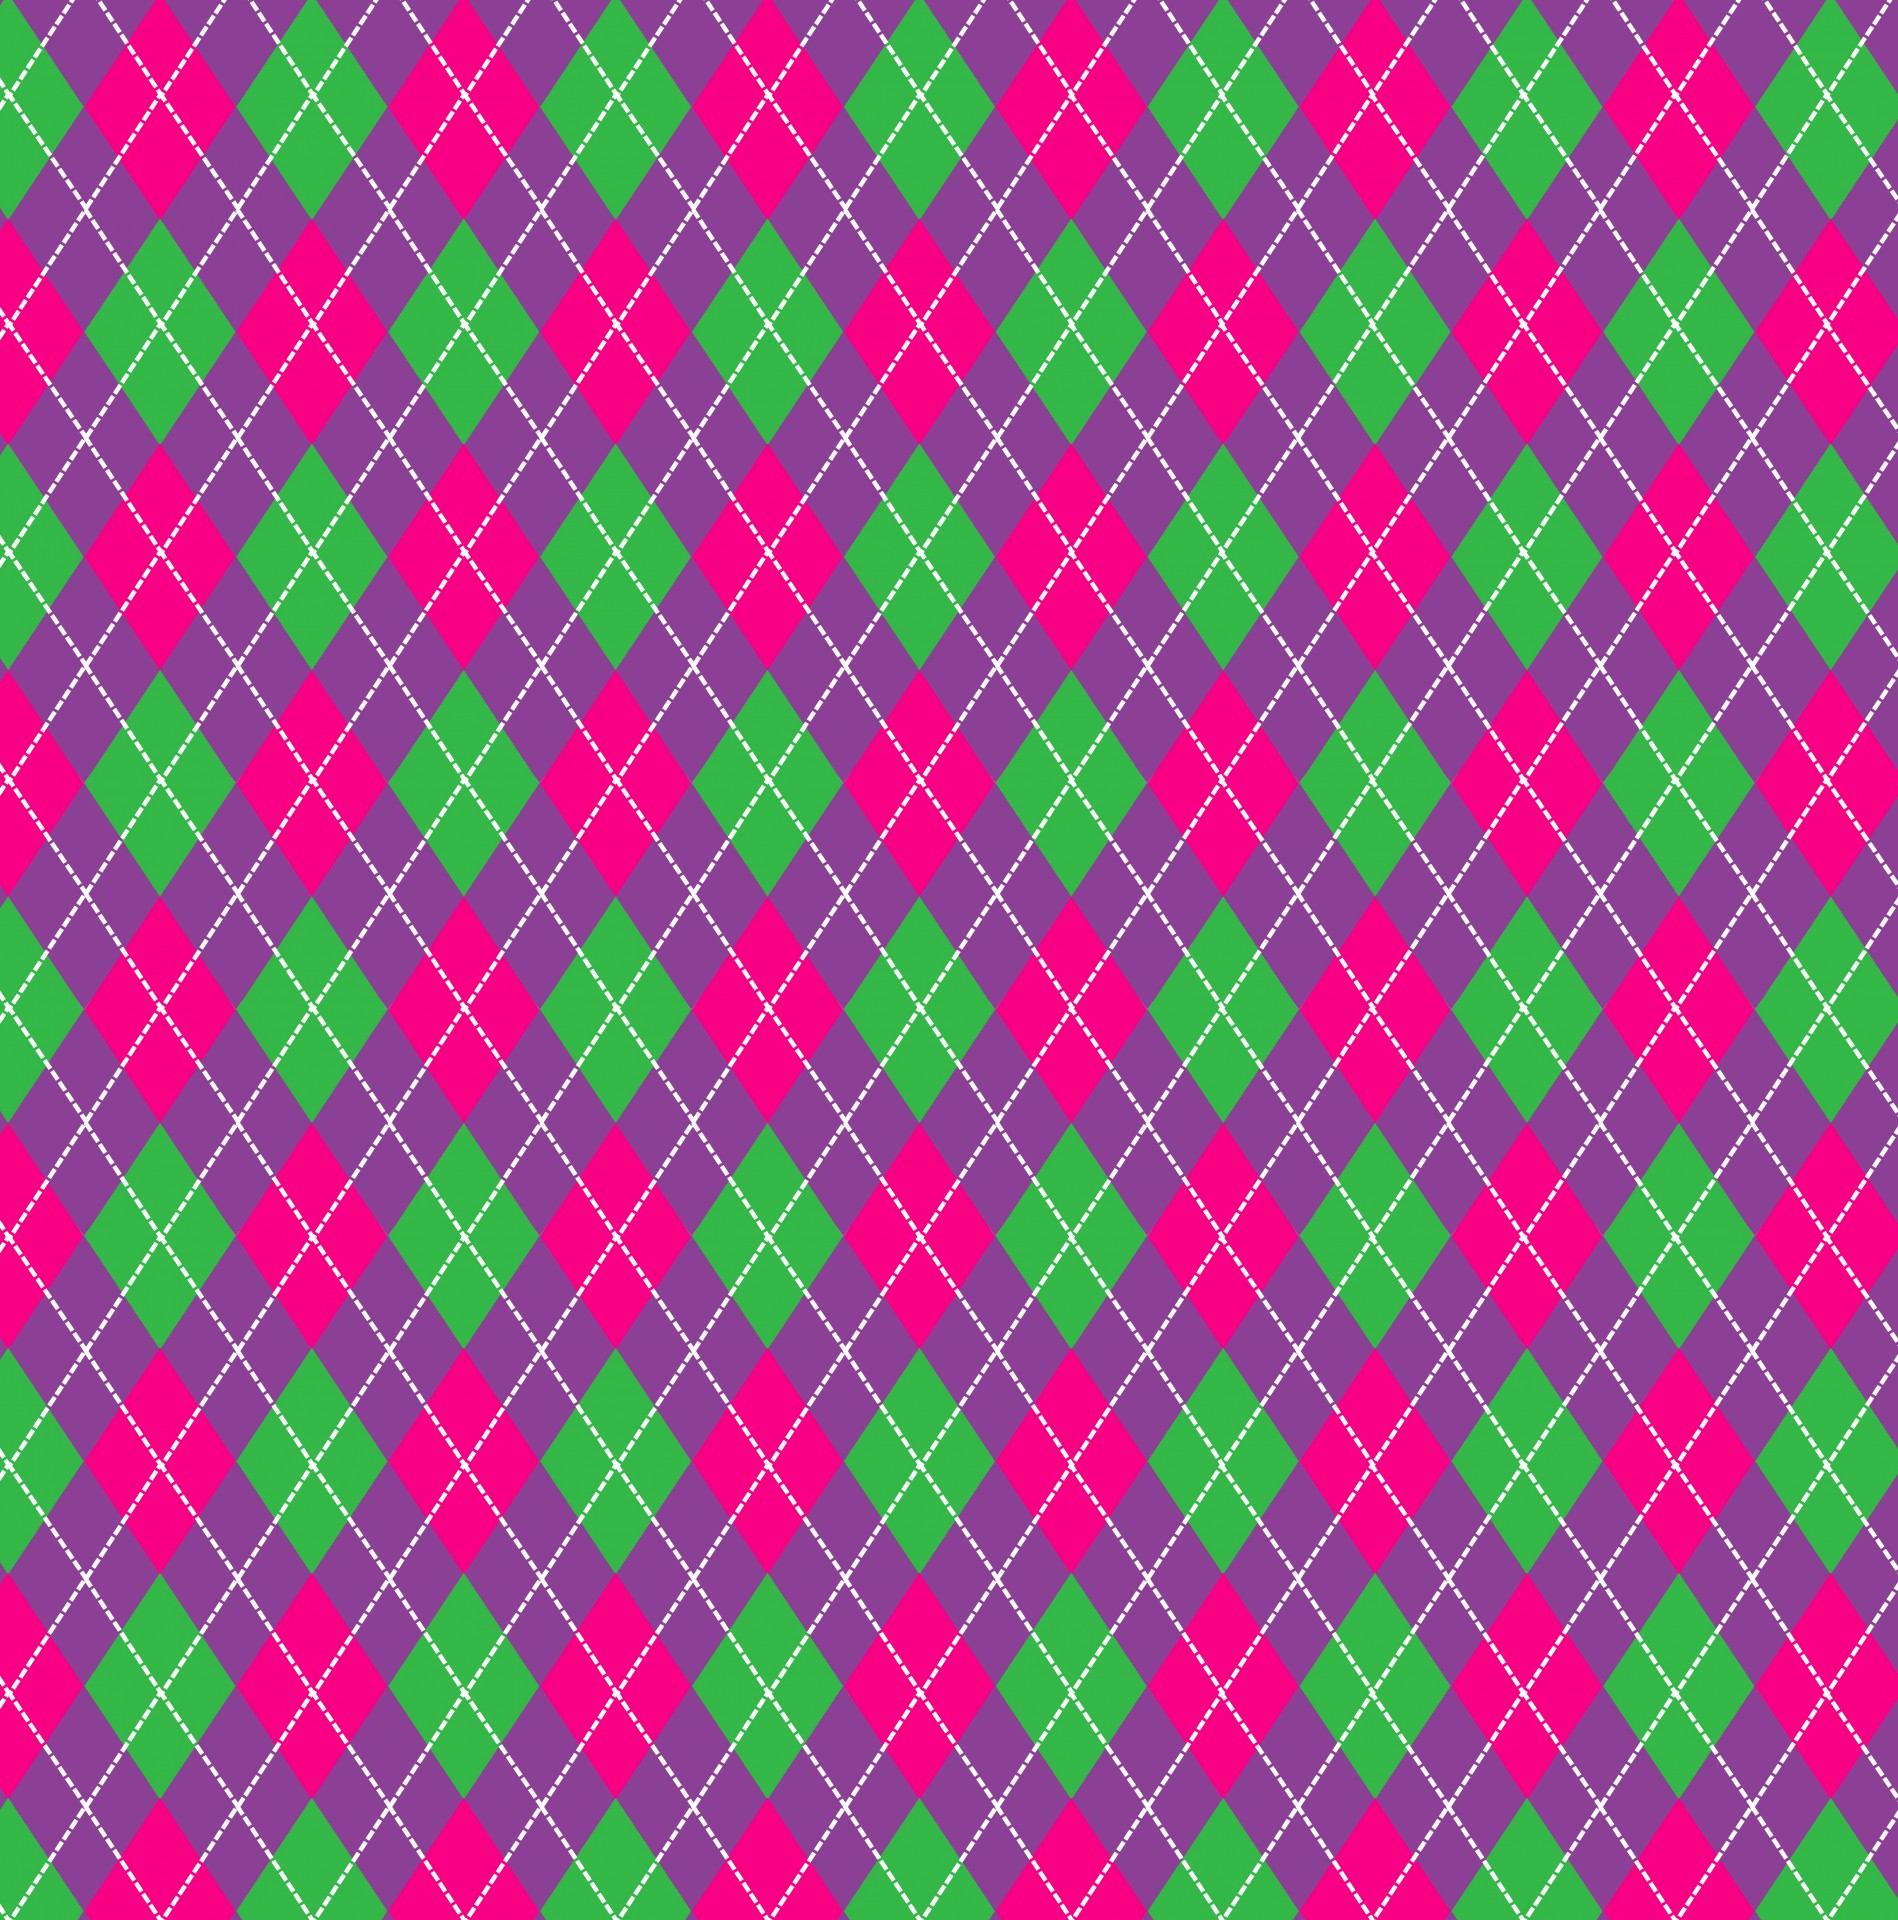 Seamless purple, pink and black argyle pattern background wallpaper for scrapbooking